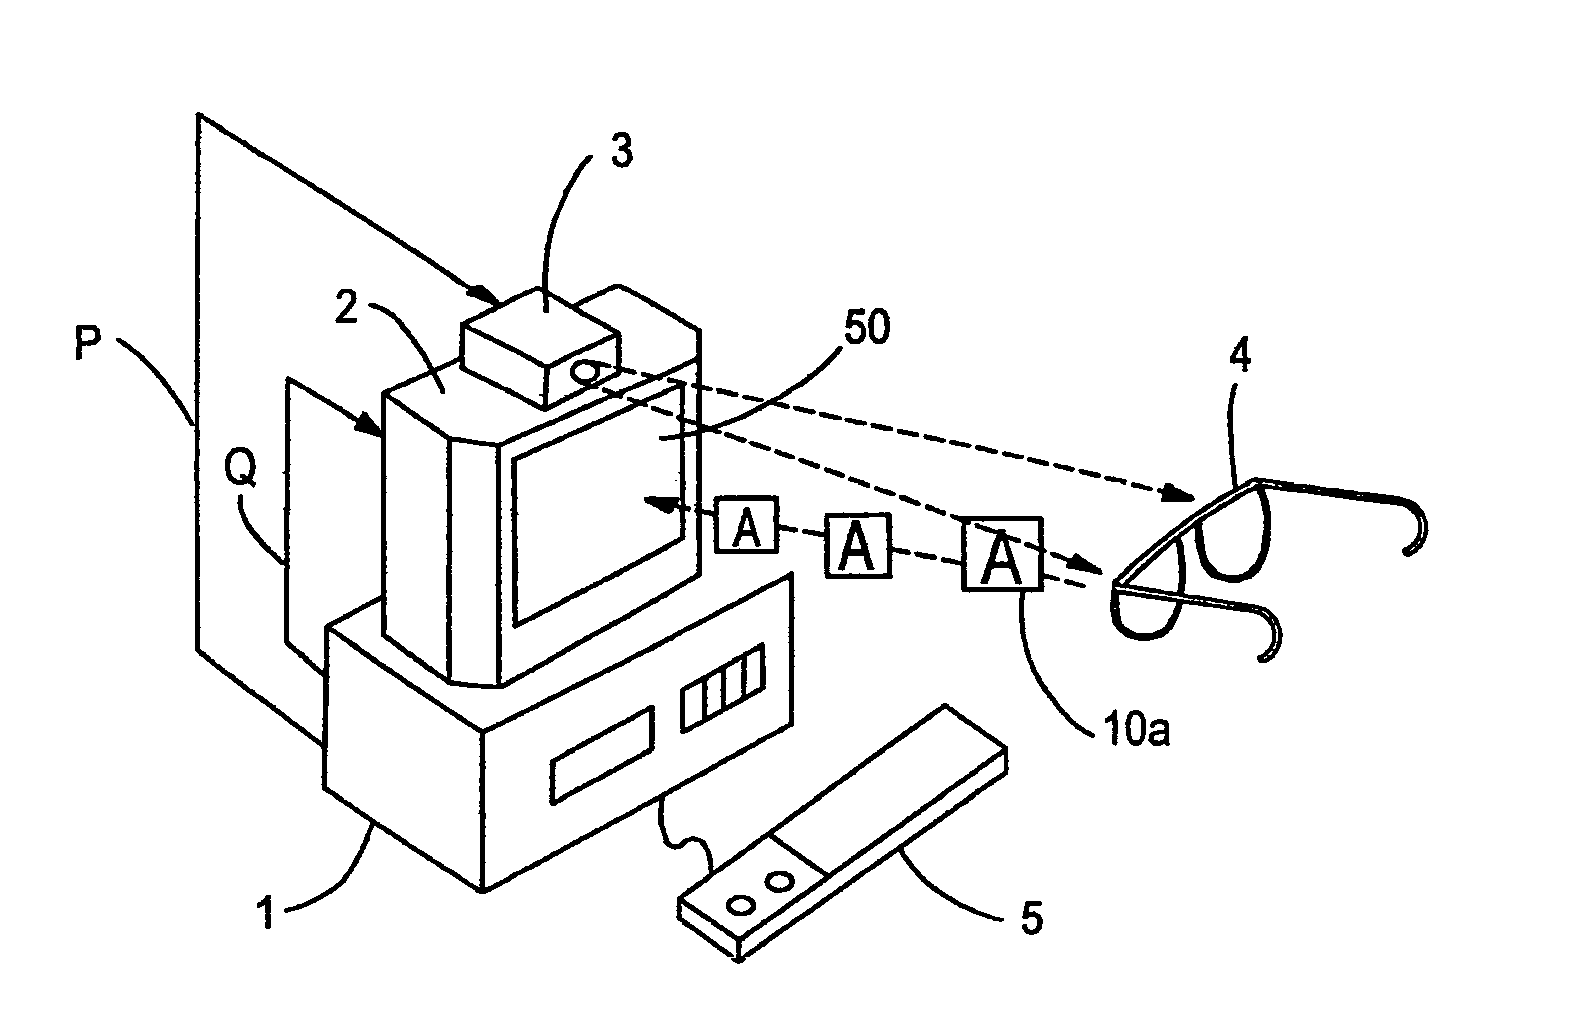 Apparatus for recovering eyesight utilizing stereoscopic video and method for displaying stereoscopic video